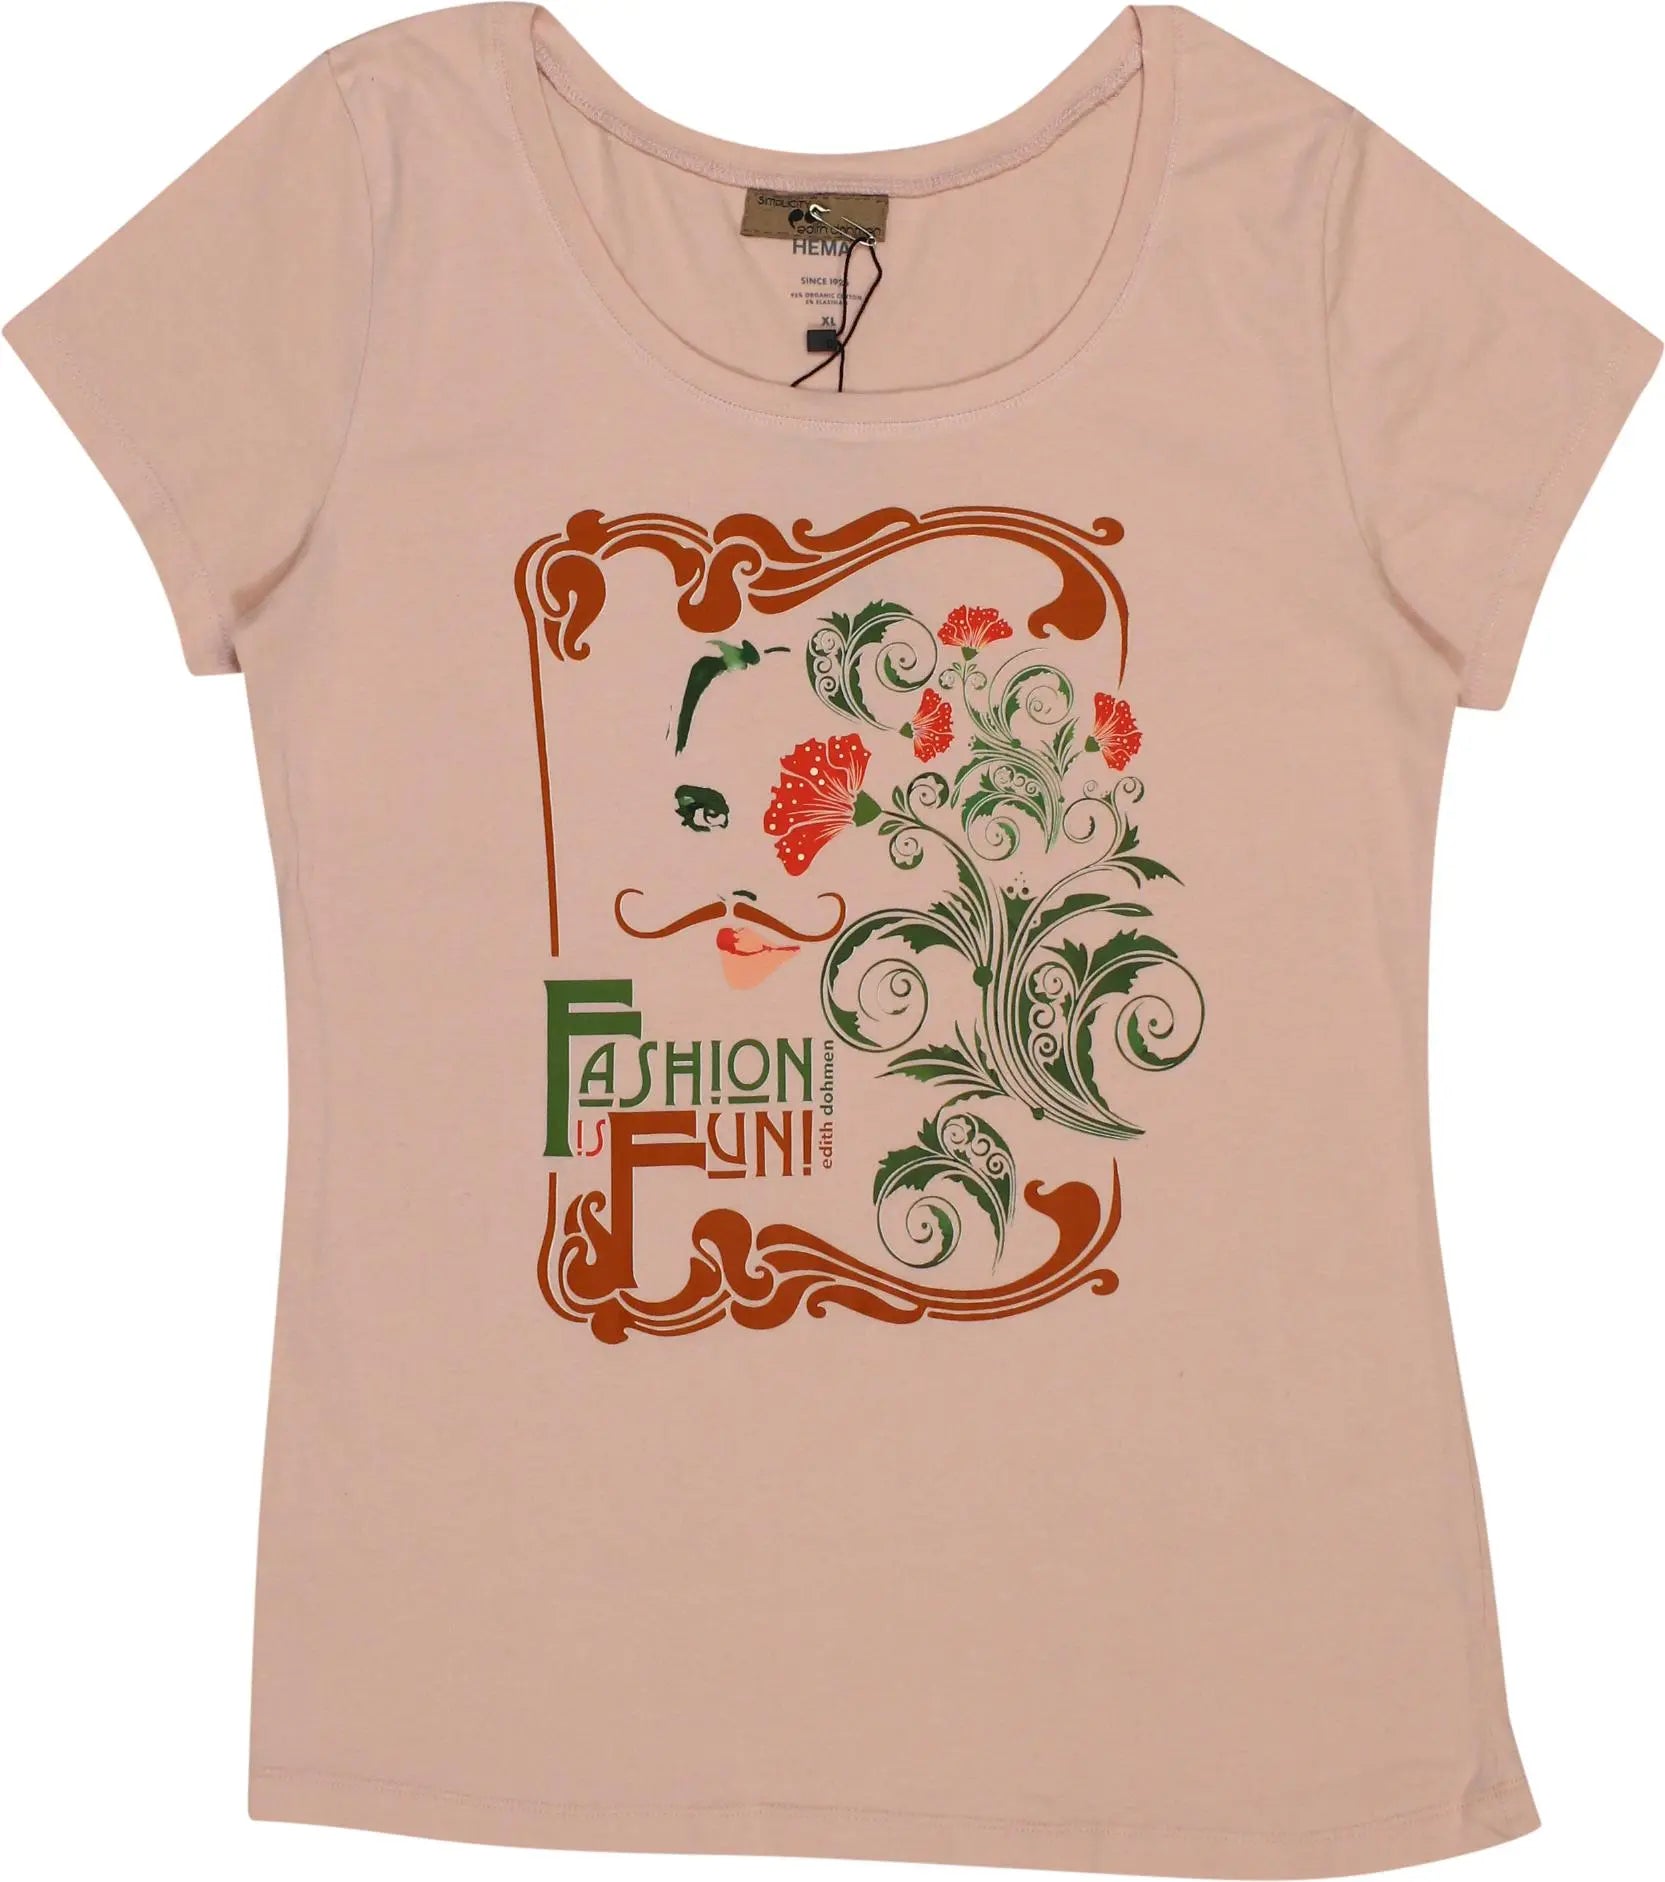 Simplicity - T-Shirt with Print Designed by Edith Dohmen- ThriftTale.com - Vintage and second handclothing